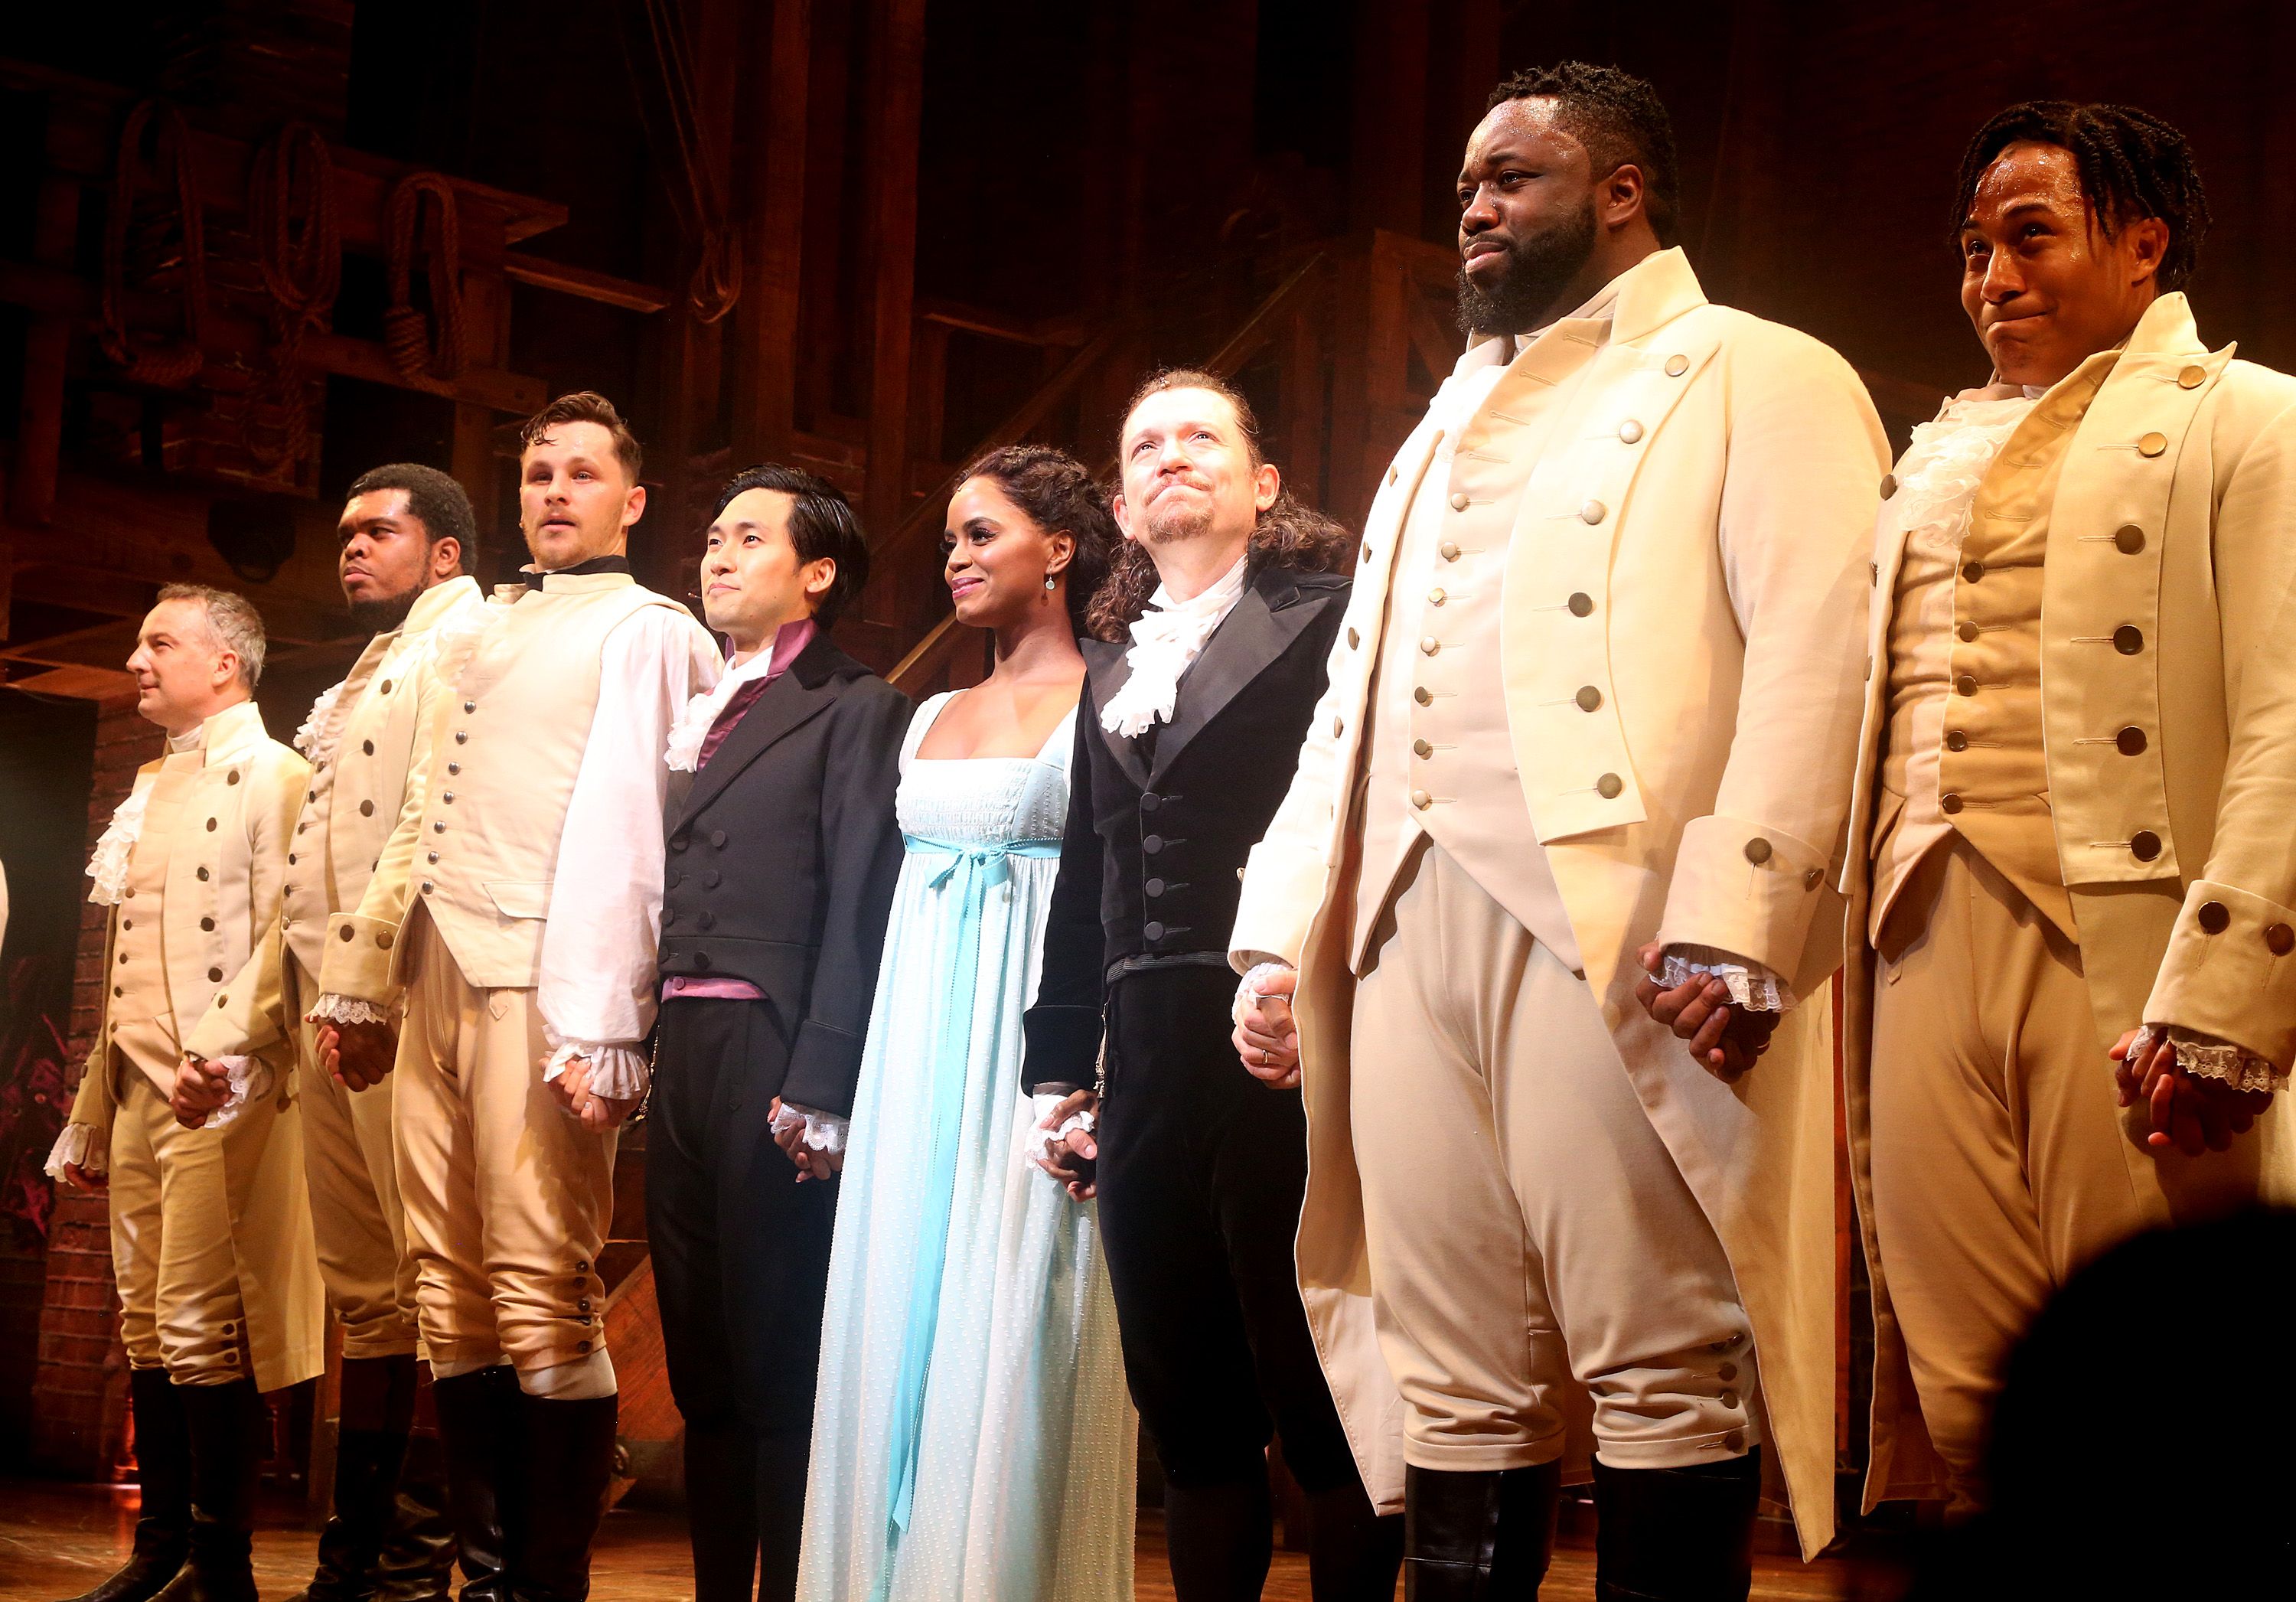 Picture of the "Hamilton" cast holding hands and looking out at the crowd